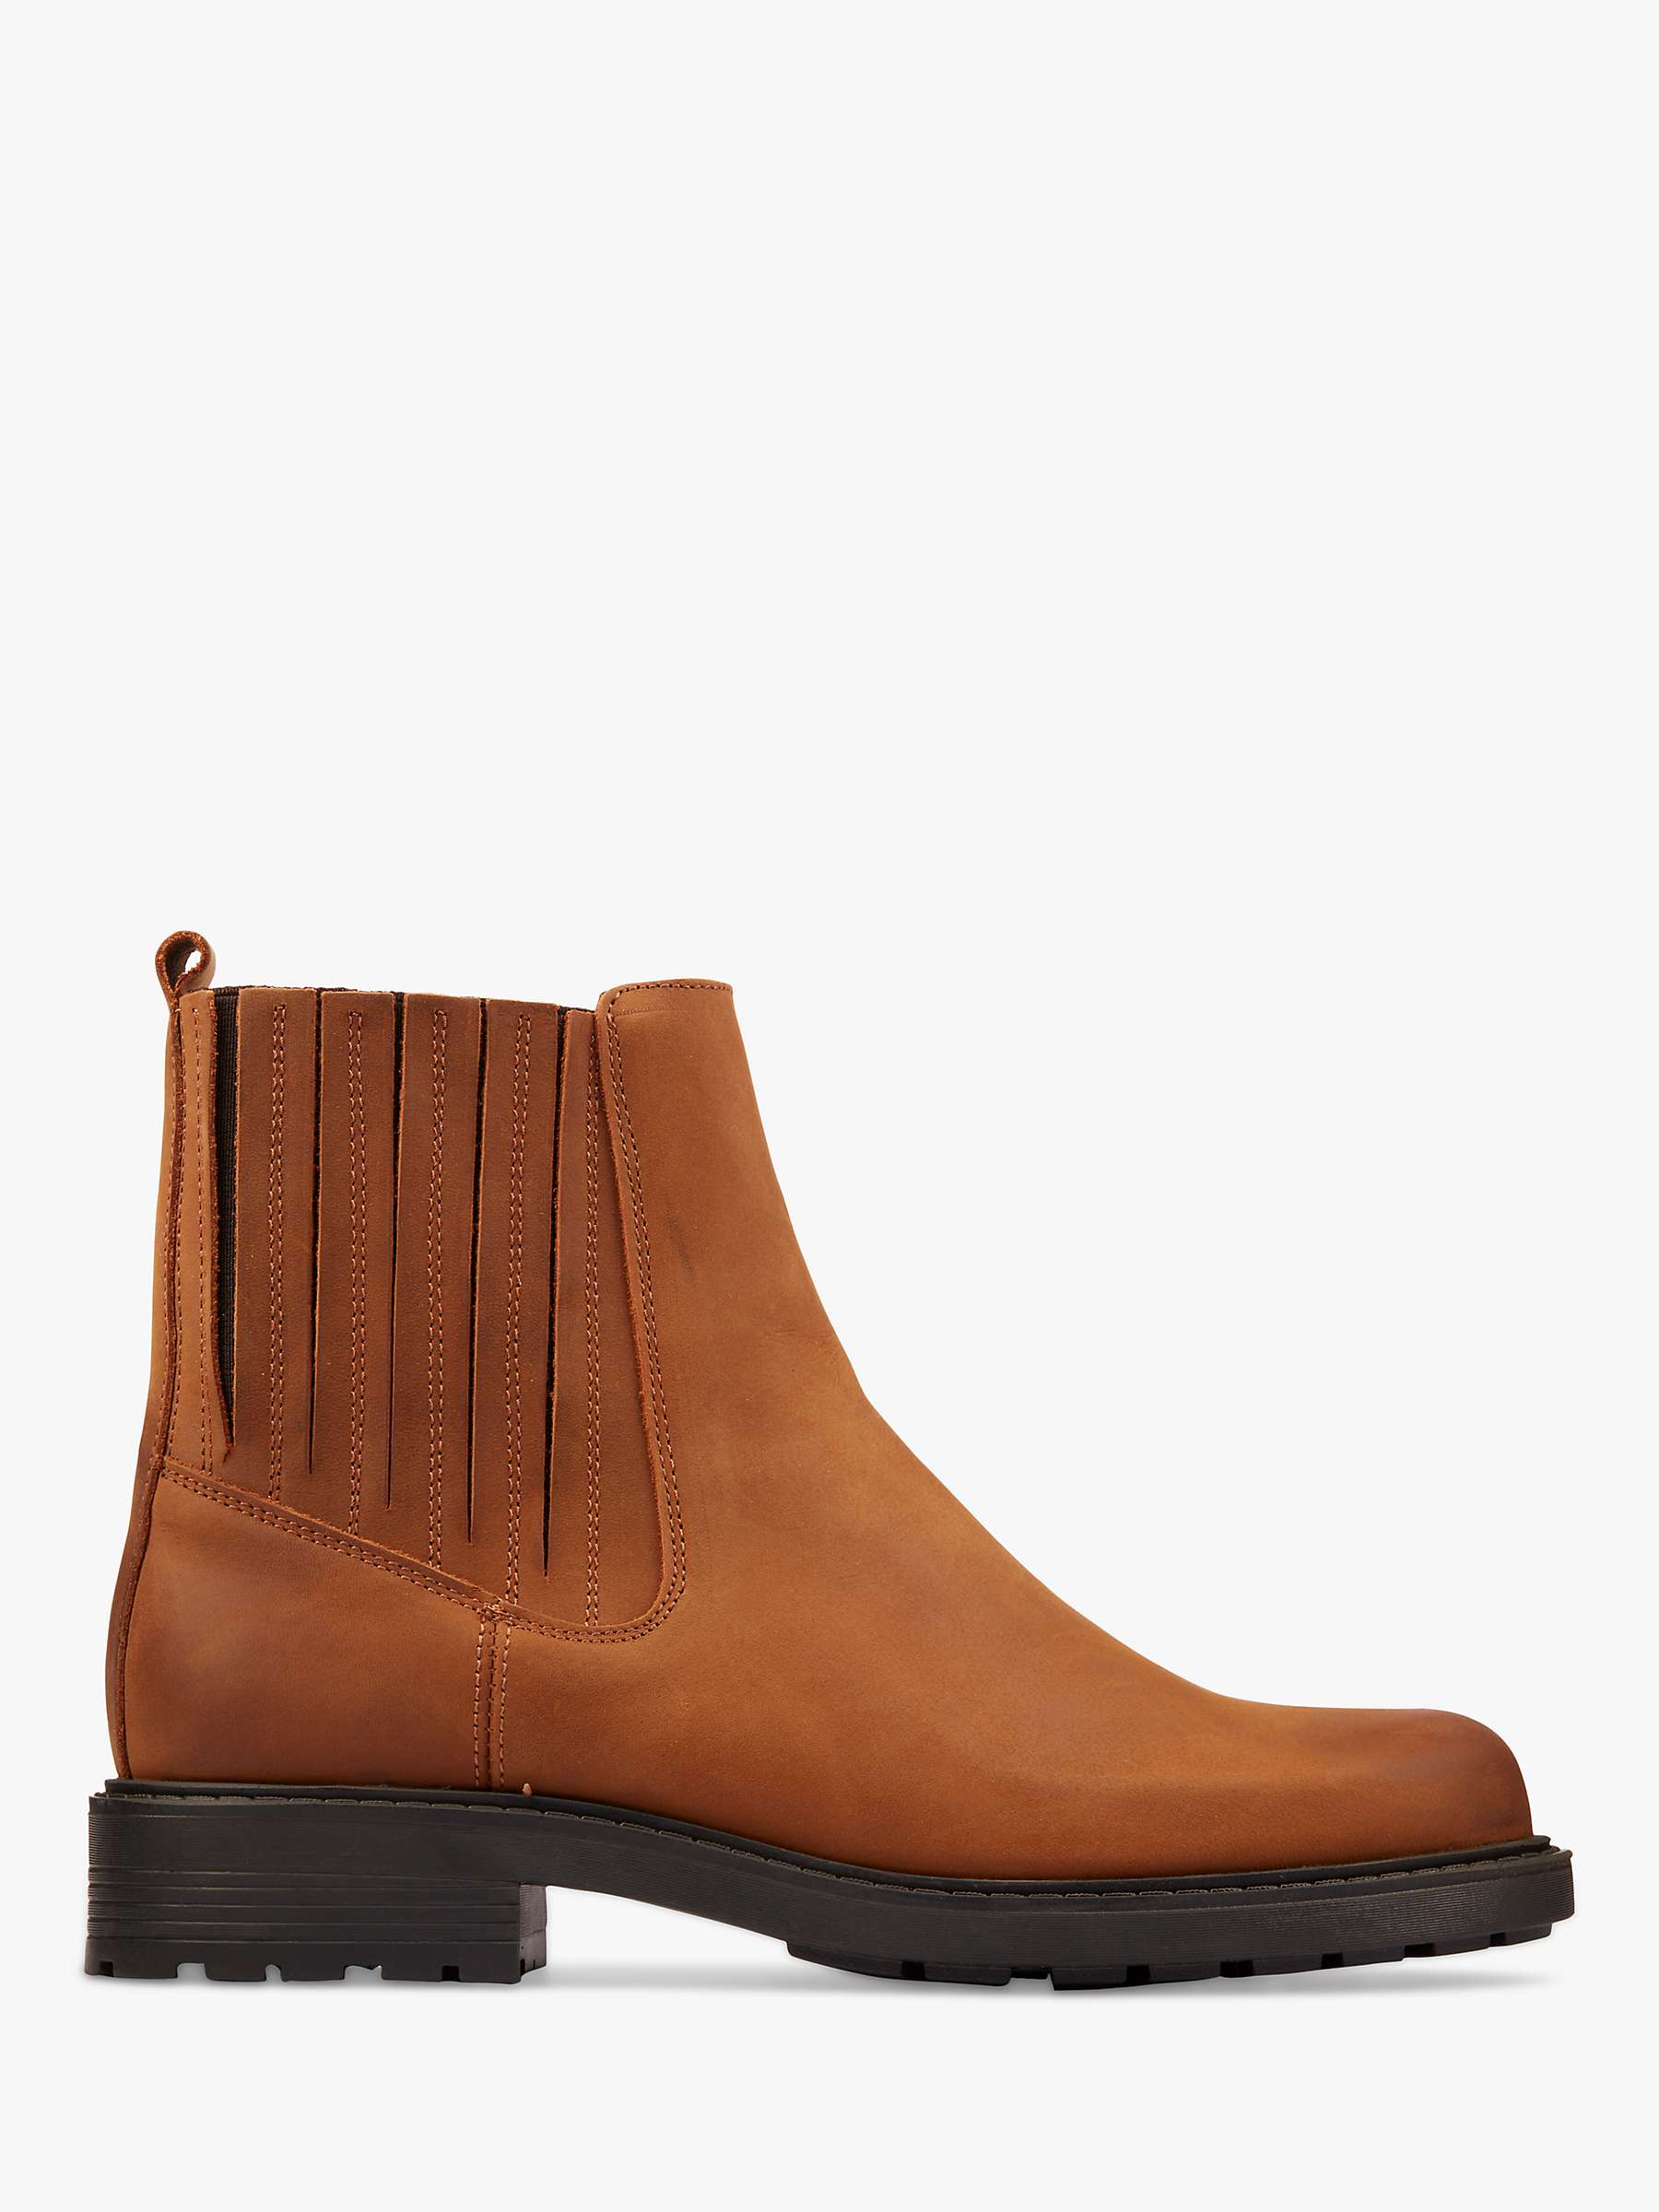 Clarks Orinoco Leather Chelsea Boots, Brown at John Lewis & Partners